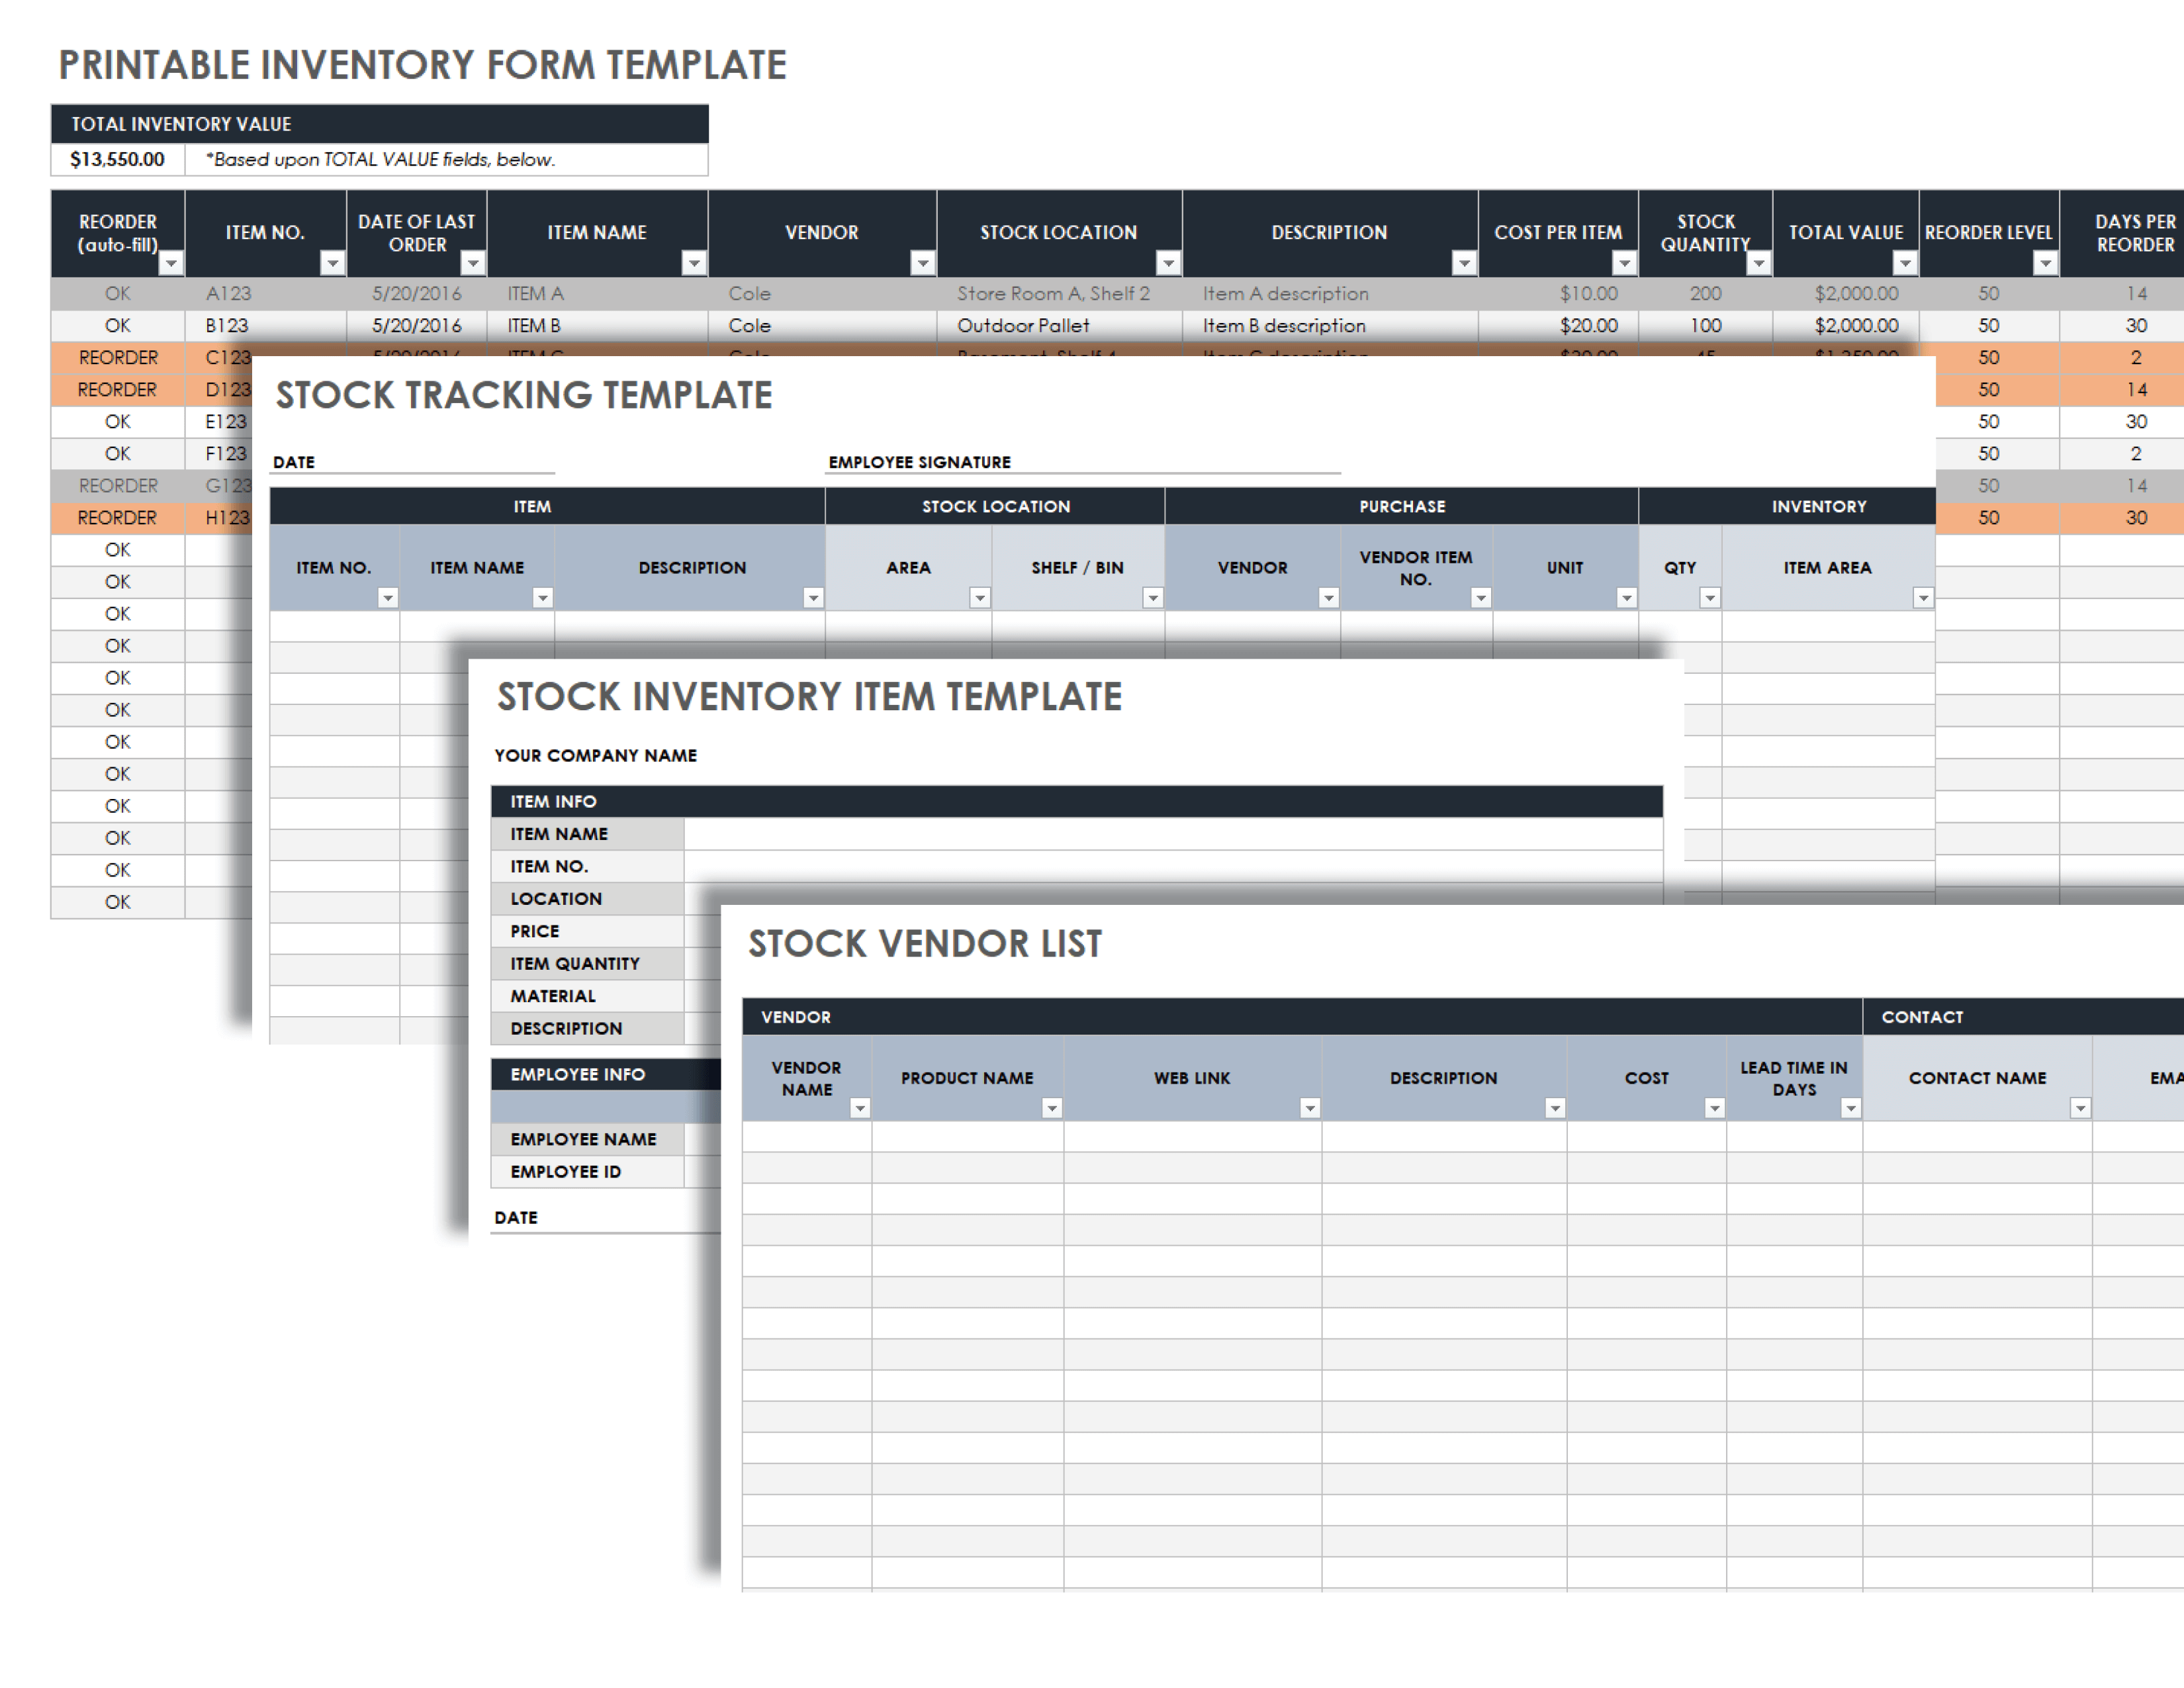 Printable Inventory Form Template